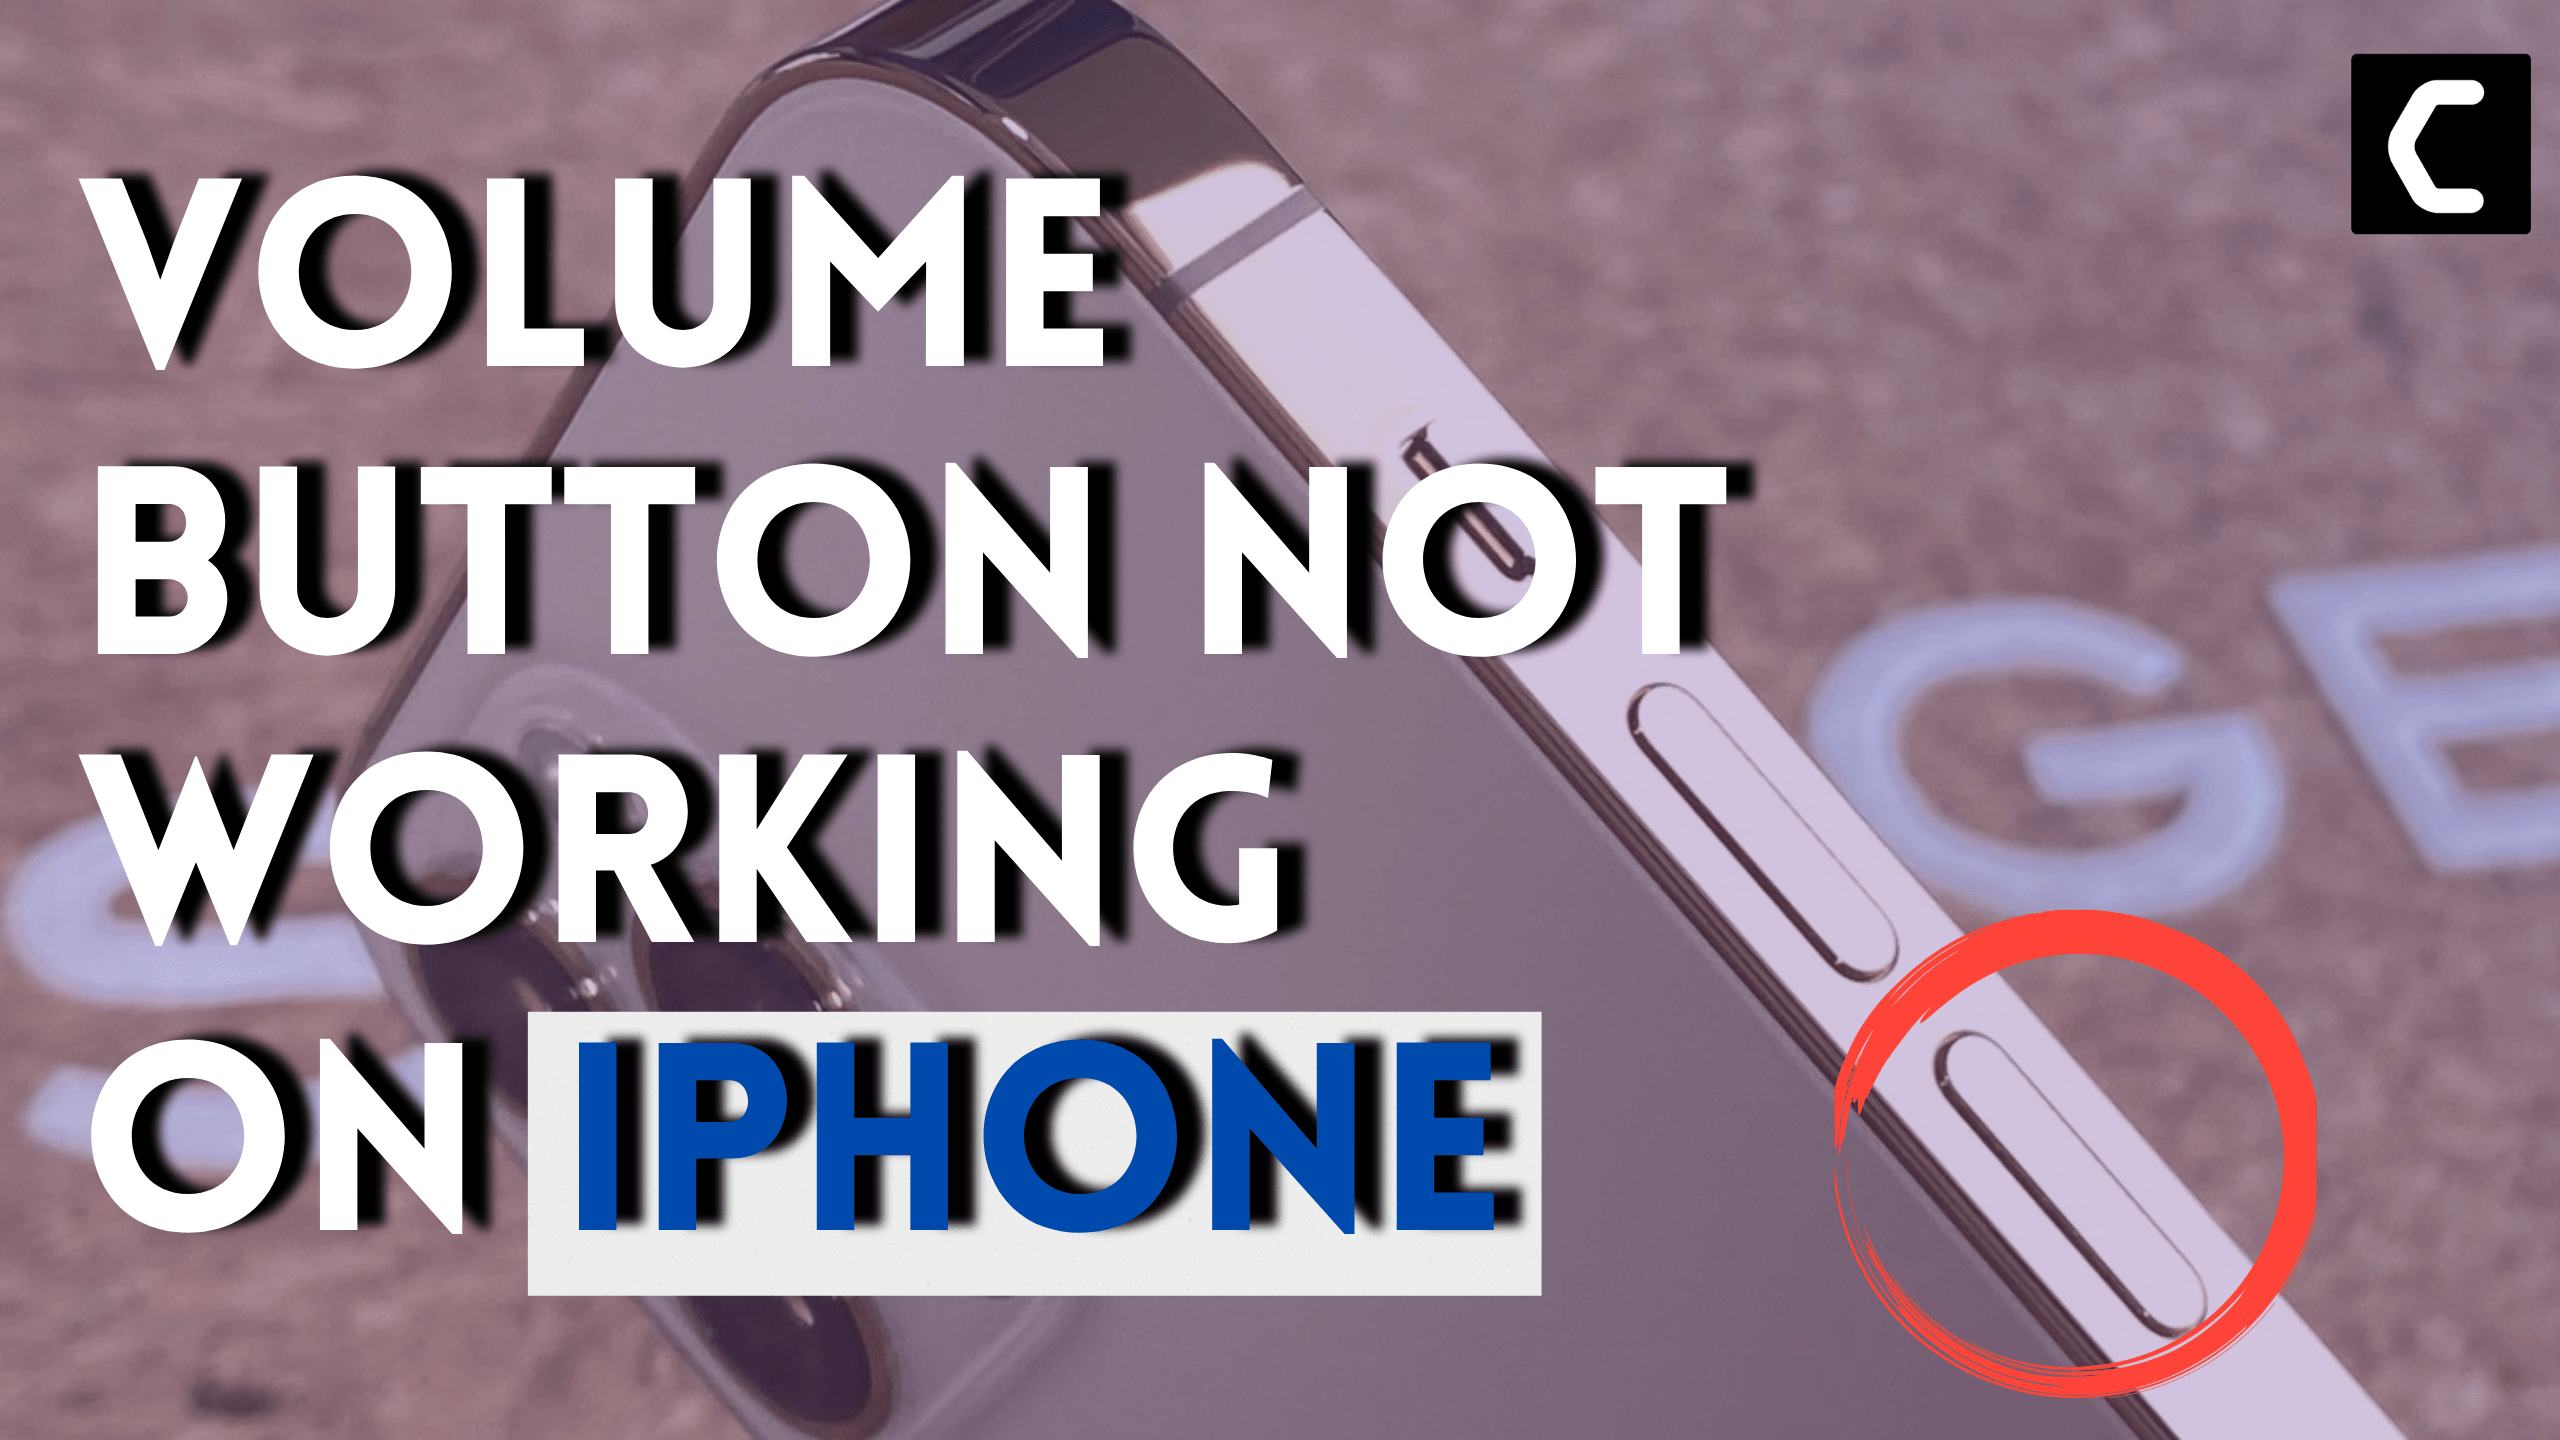 Volume Button Not Working on iPhone? Best Tips & Fixes